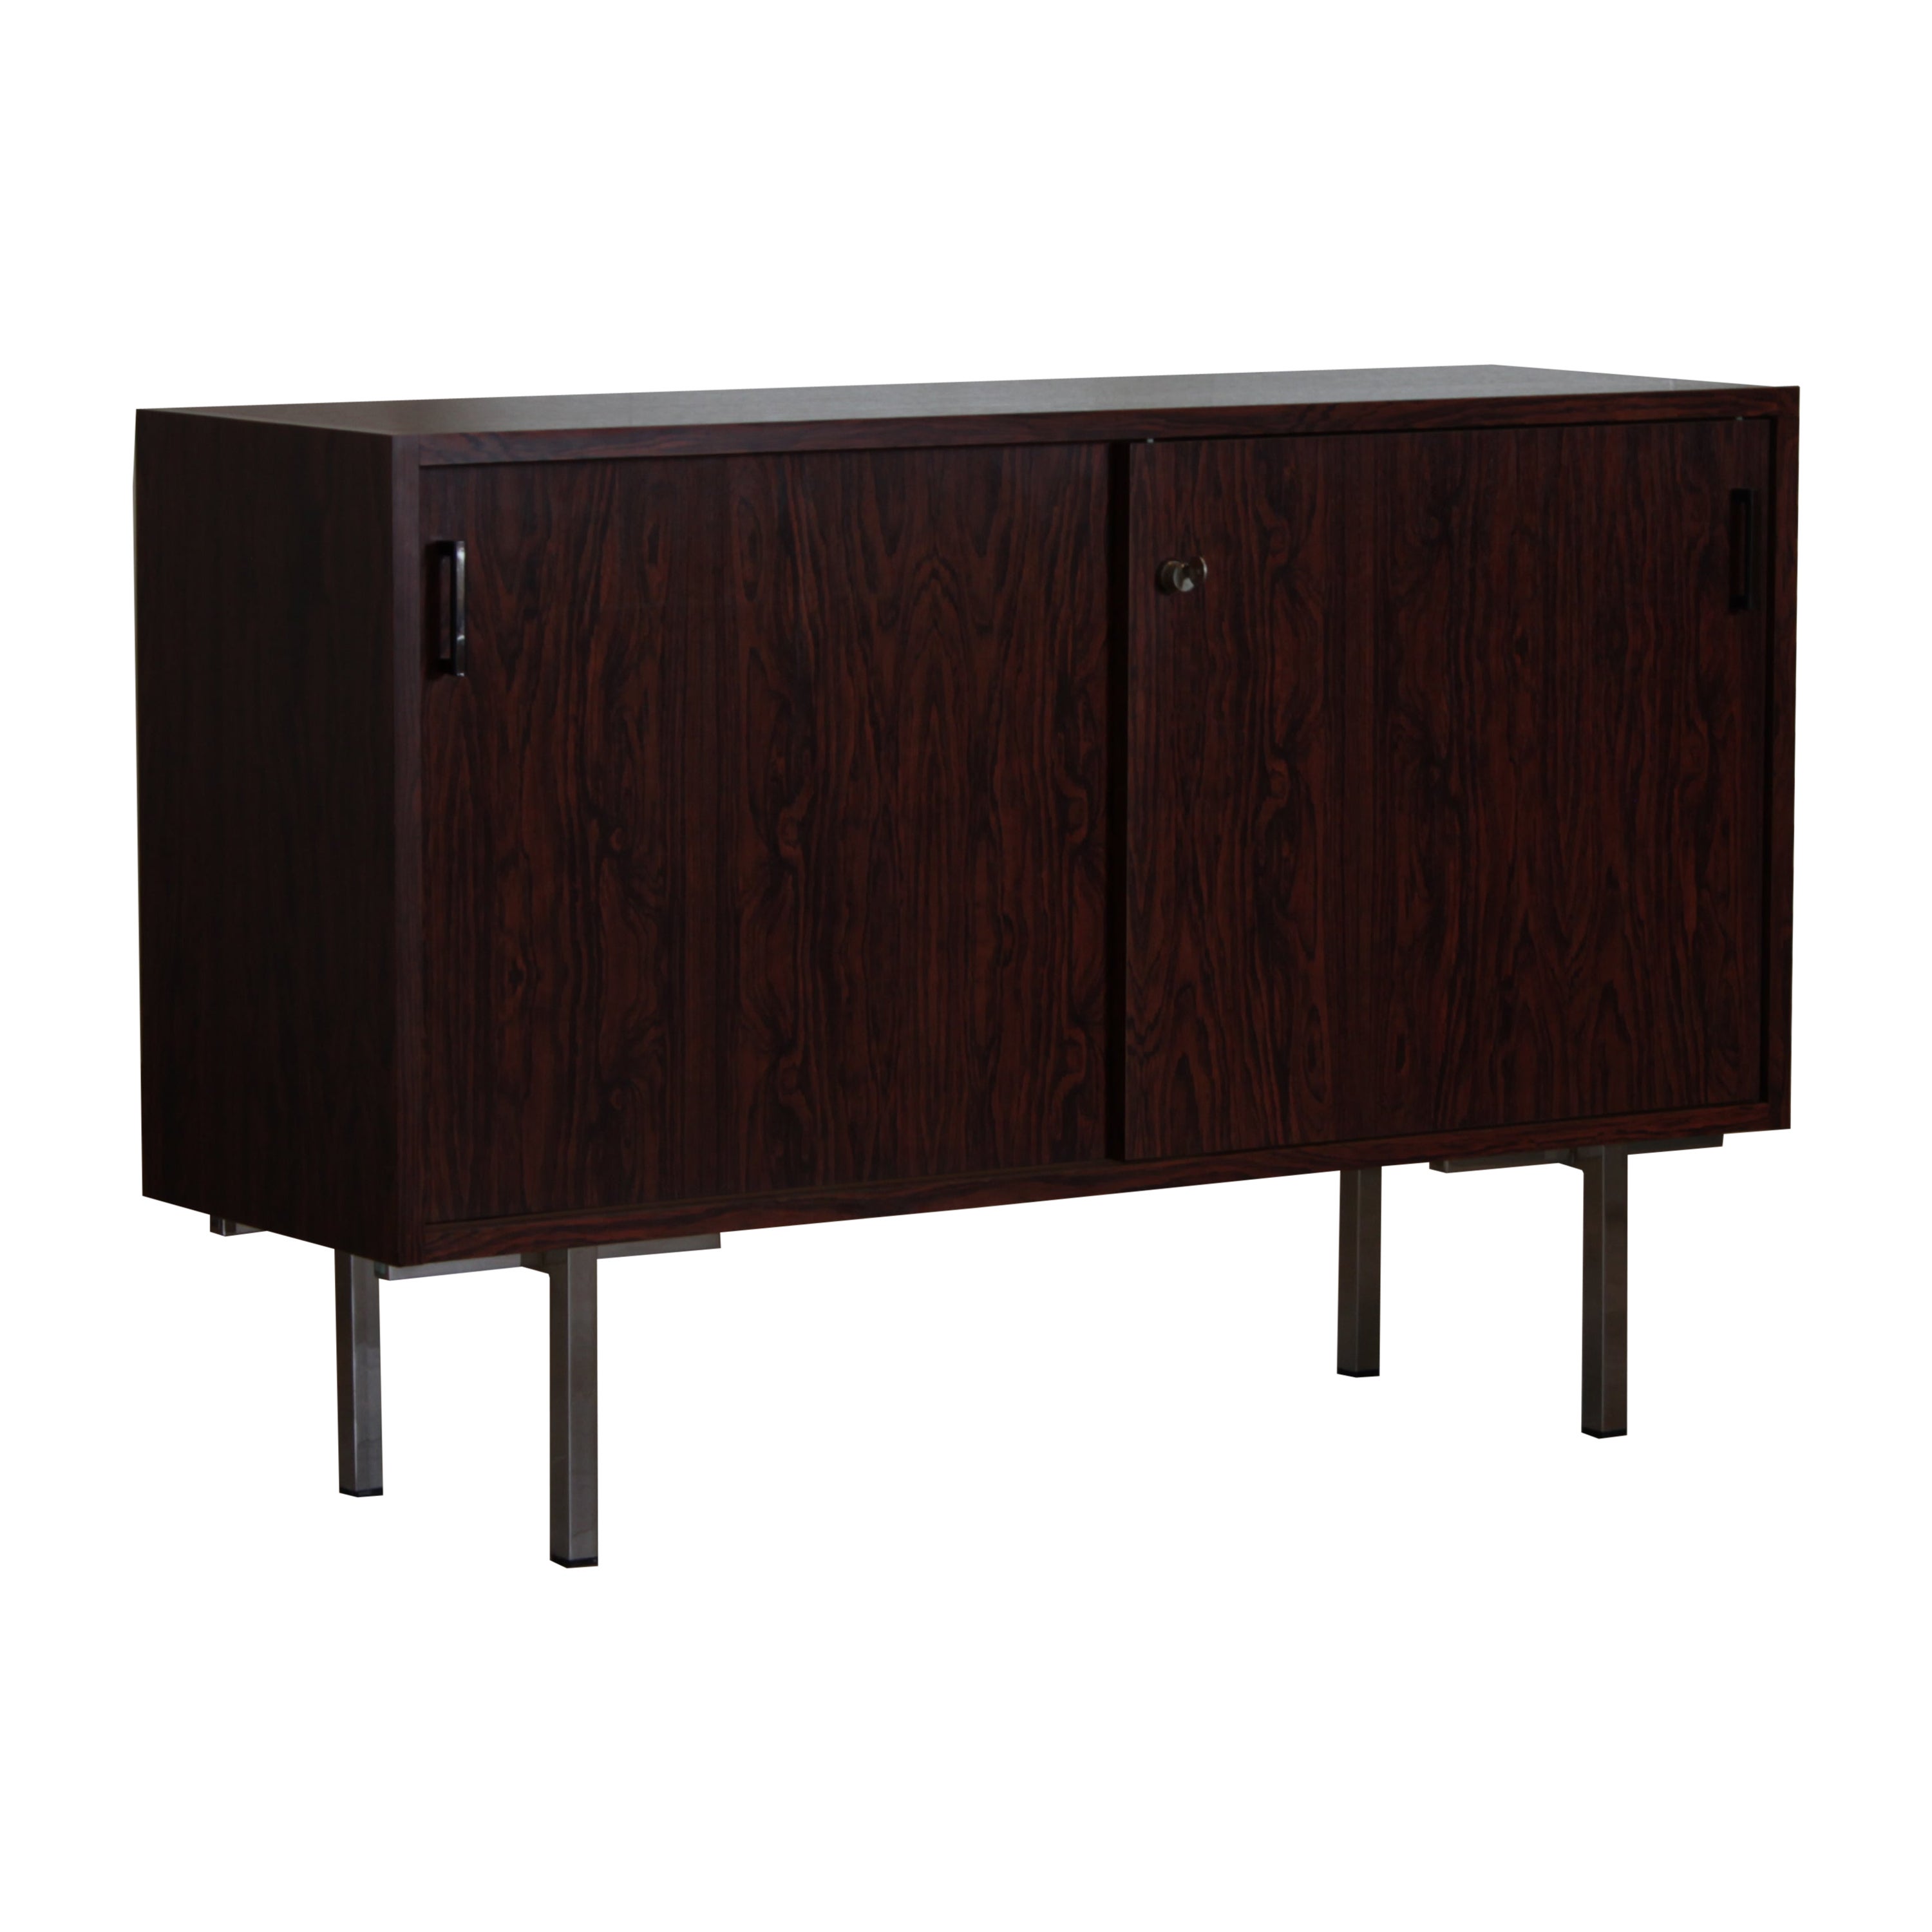 Mid 20th Century Modern Credenza attributed to Alfred Hendrickx for Belform For Sale